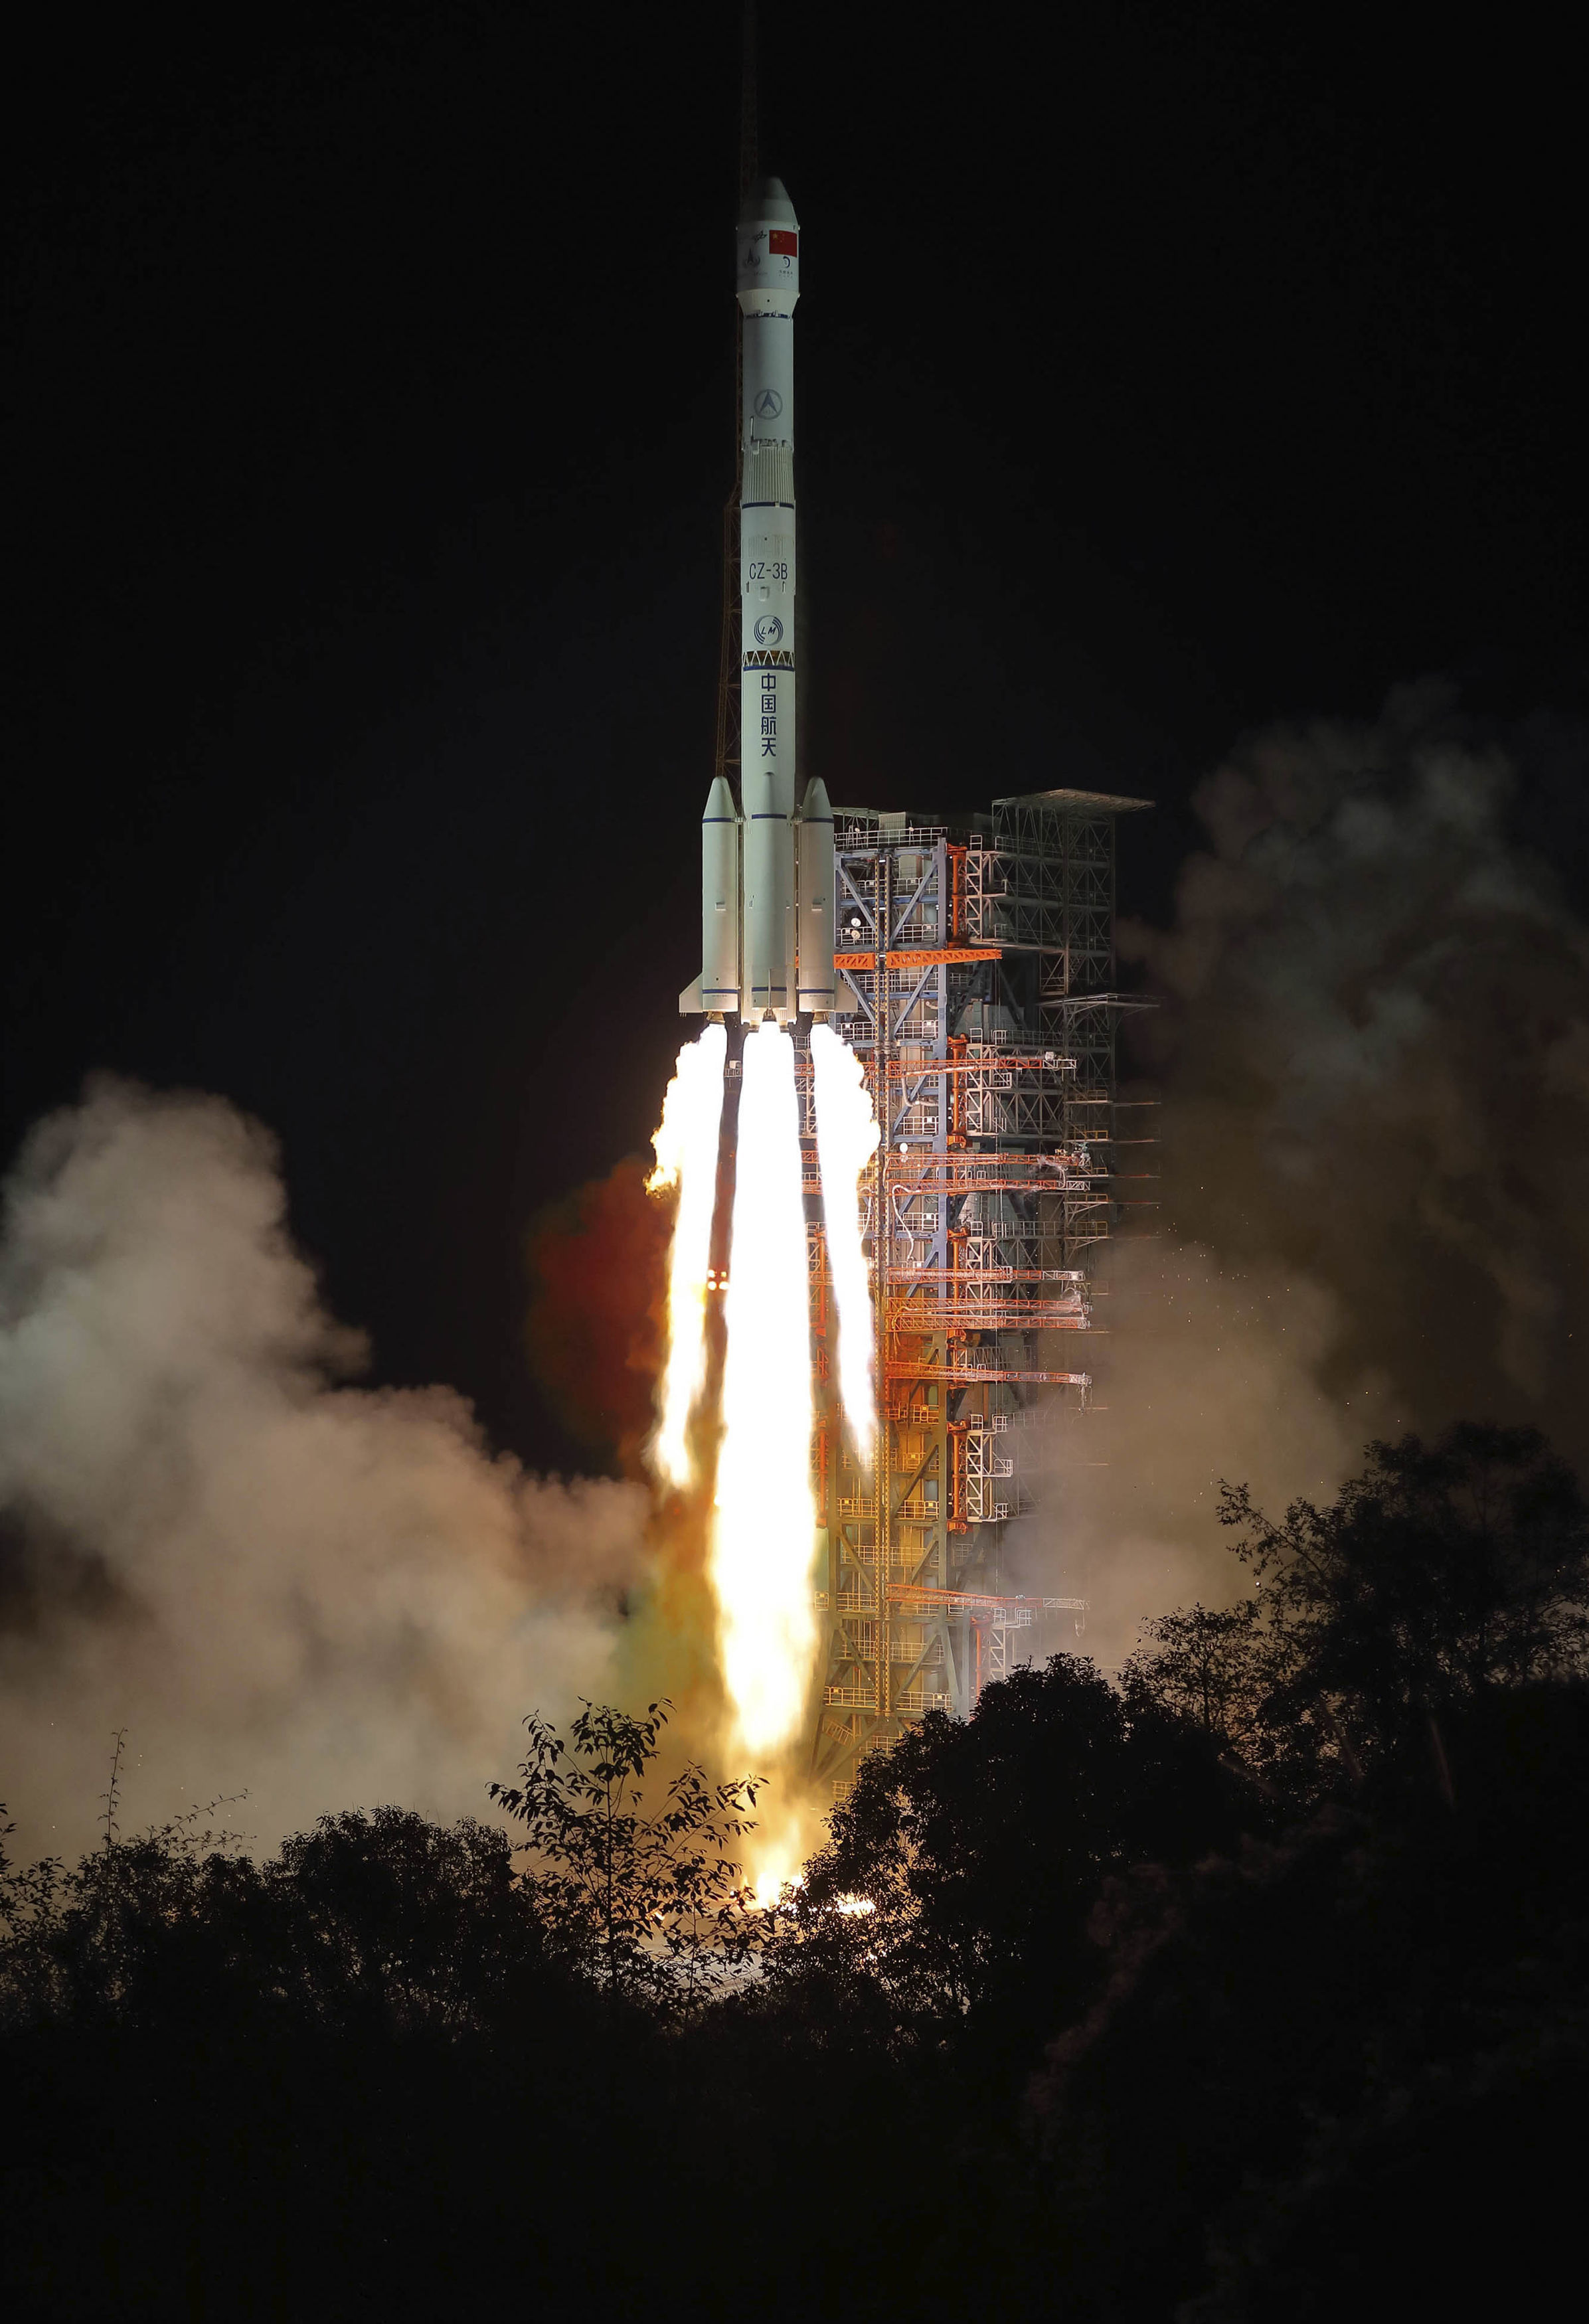 The Chang'e 4 lunar probe launches from the the Xichang Satellite Launch Centre